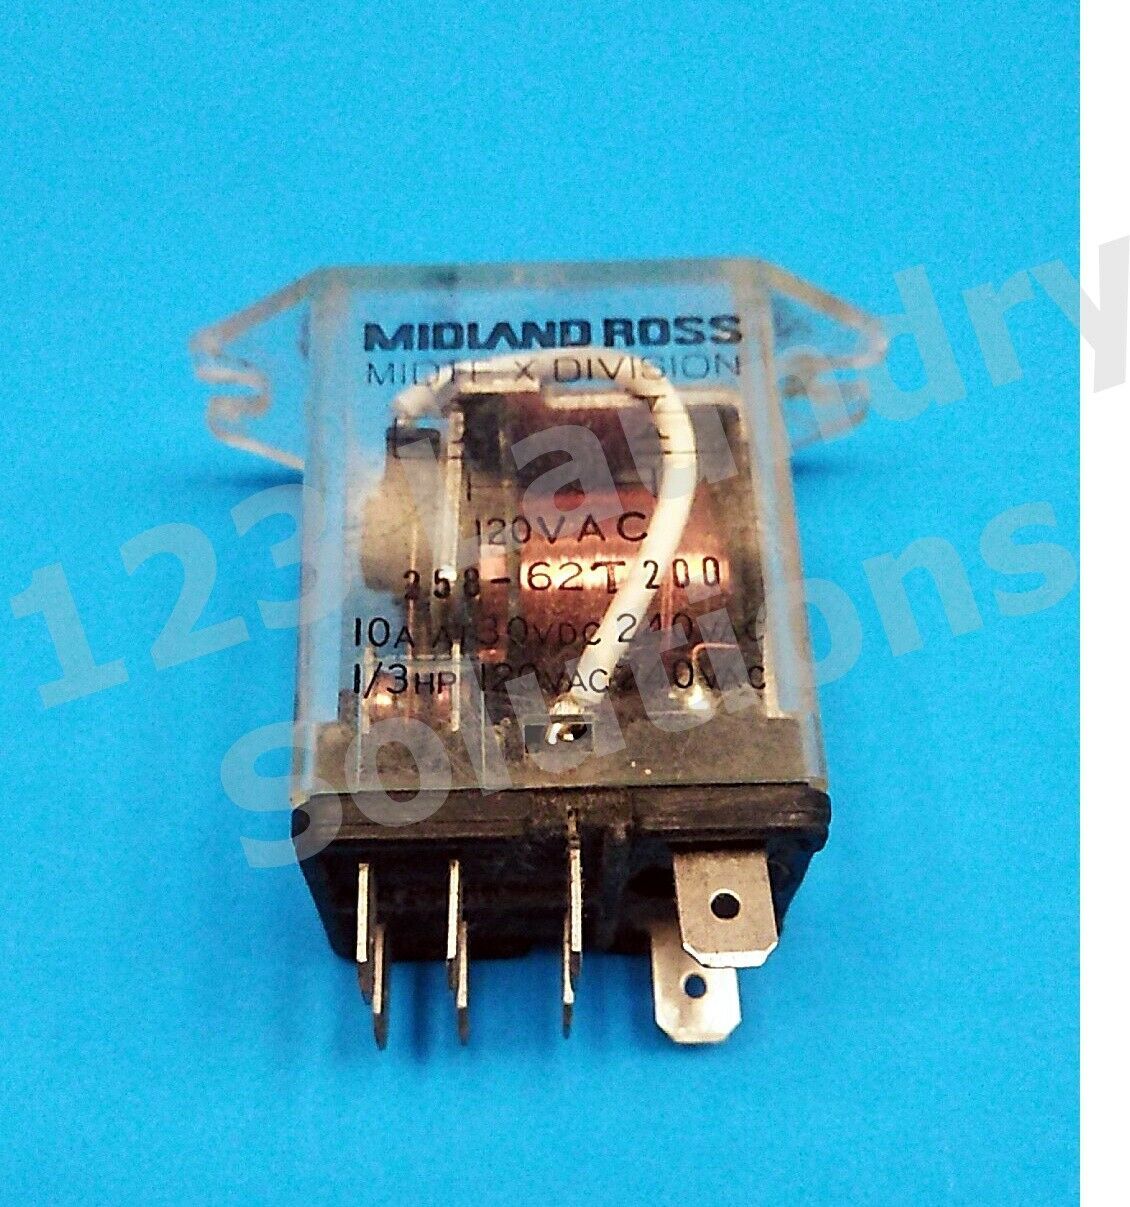 Washer Relay & Extract 120VAC for Dexter P/N: 5192-285-001 [Used] ~ - $49.80